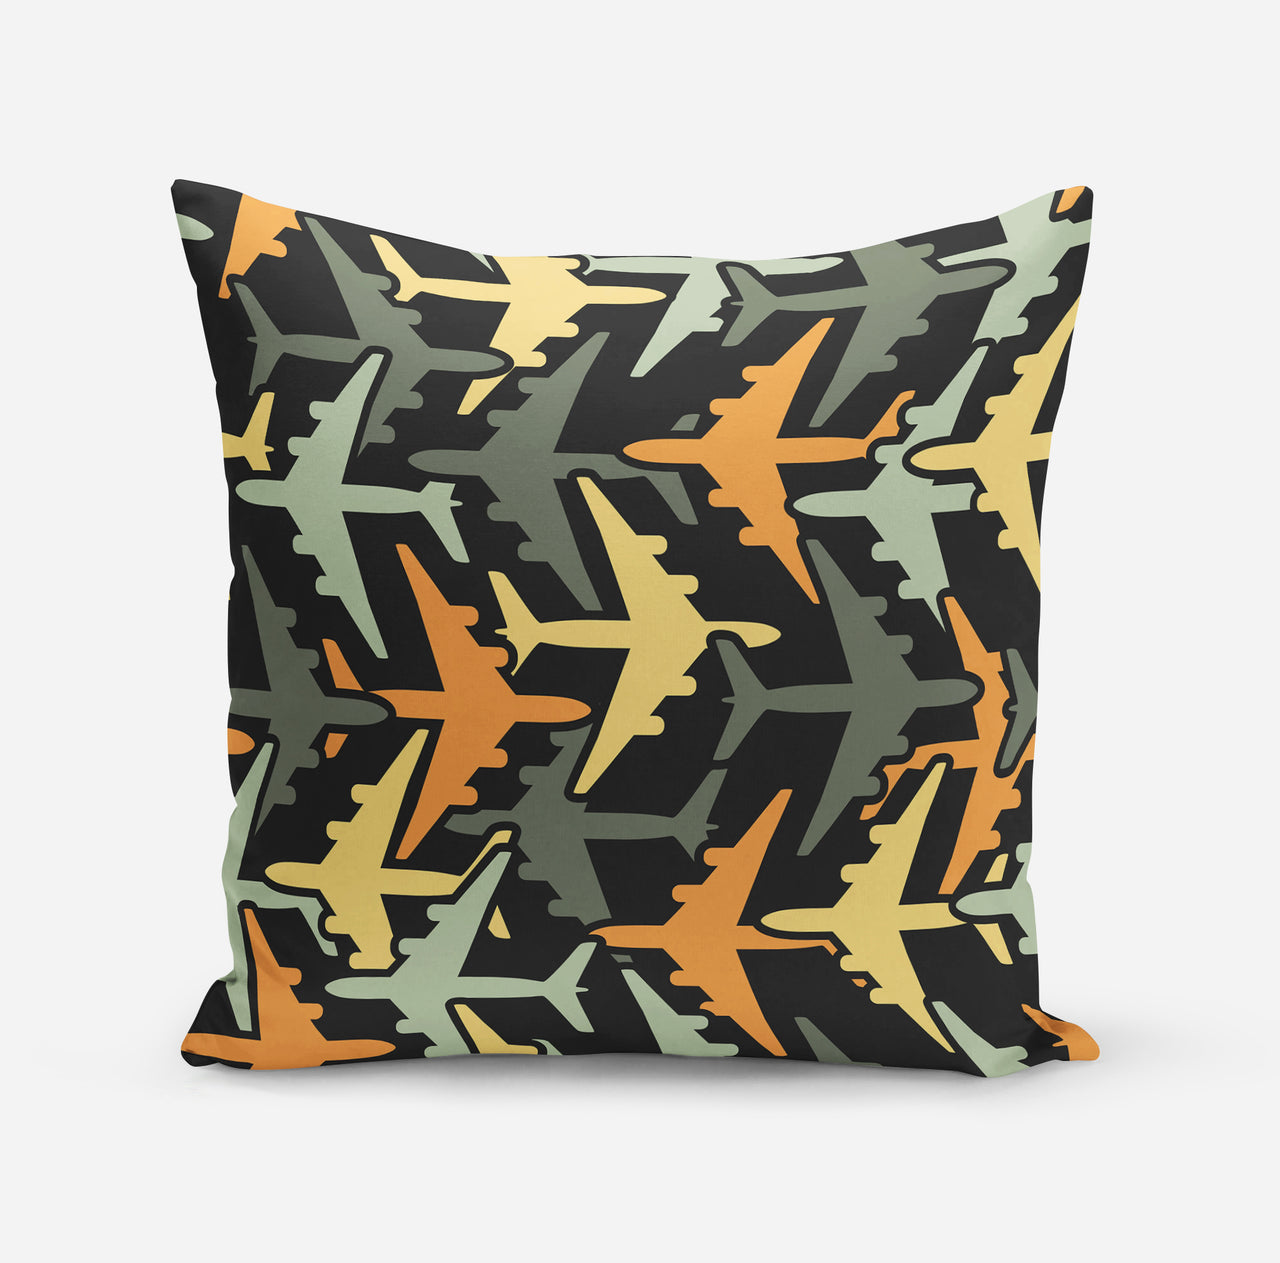 Volume 2 Super Colourful Airplanes Designed Pillowsc